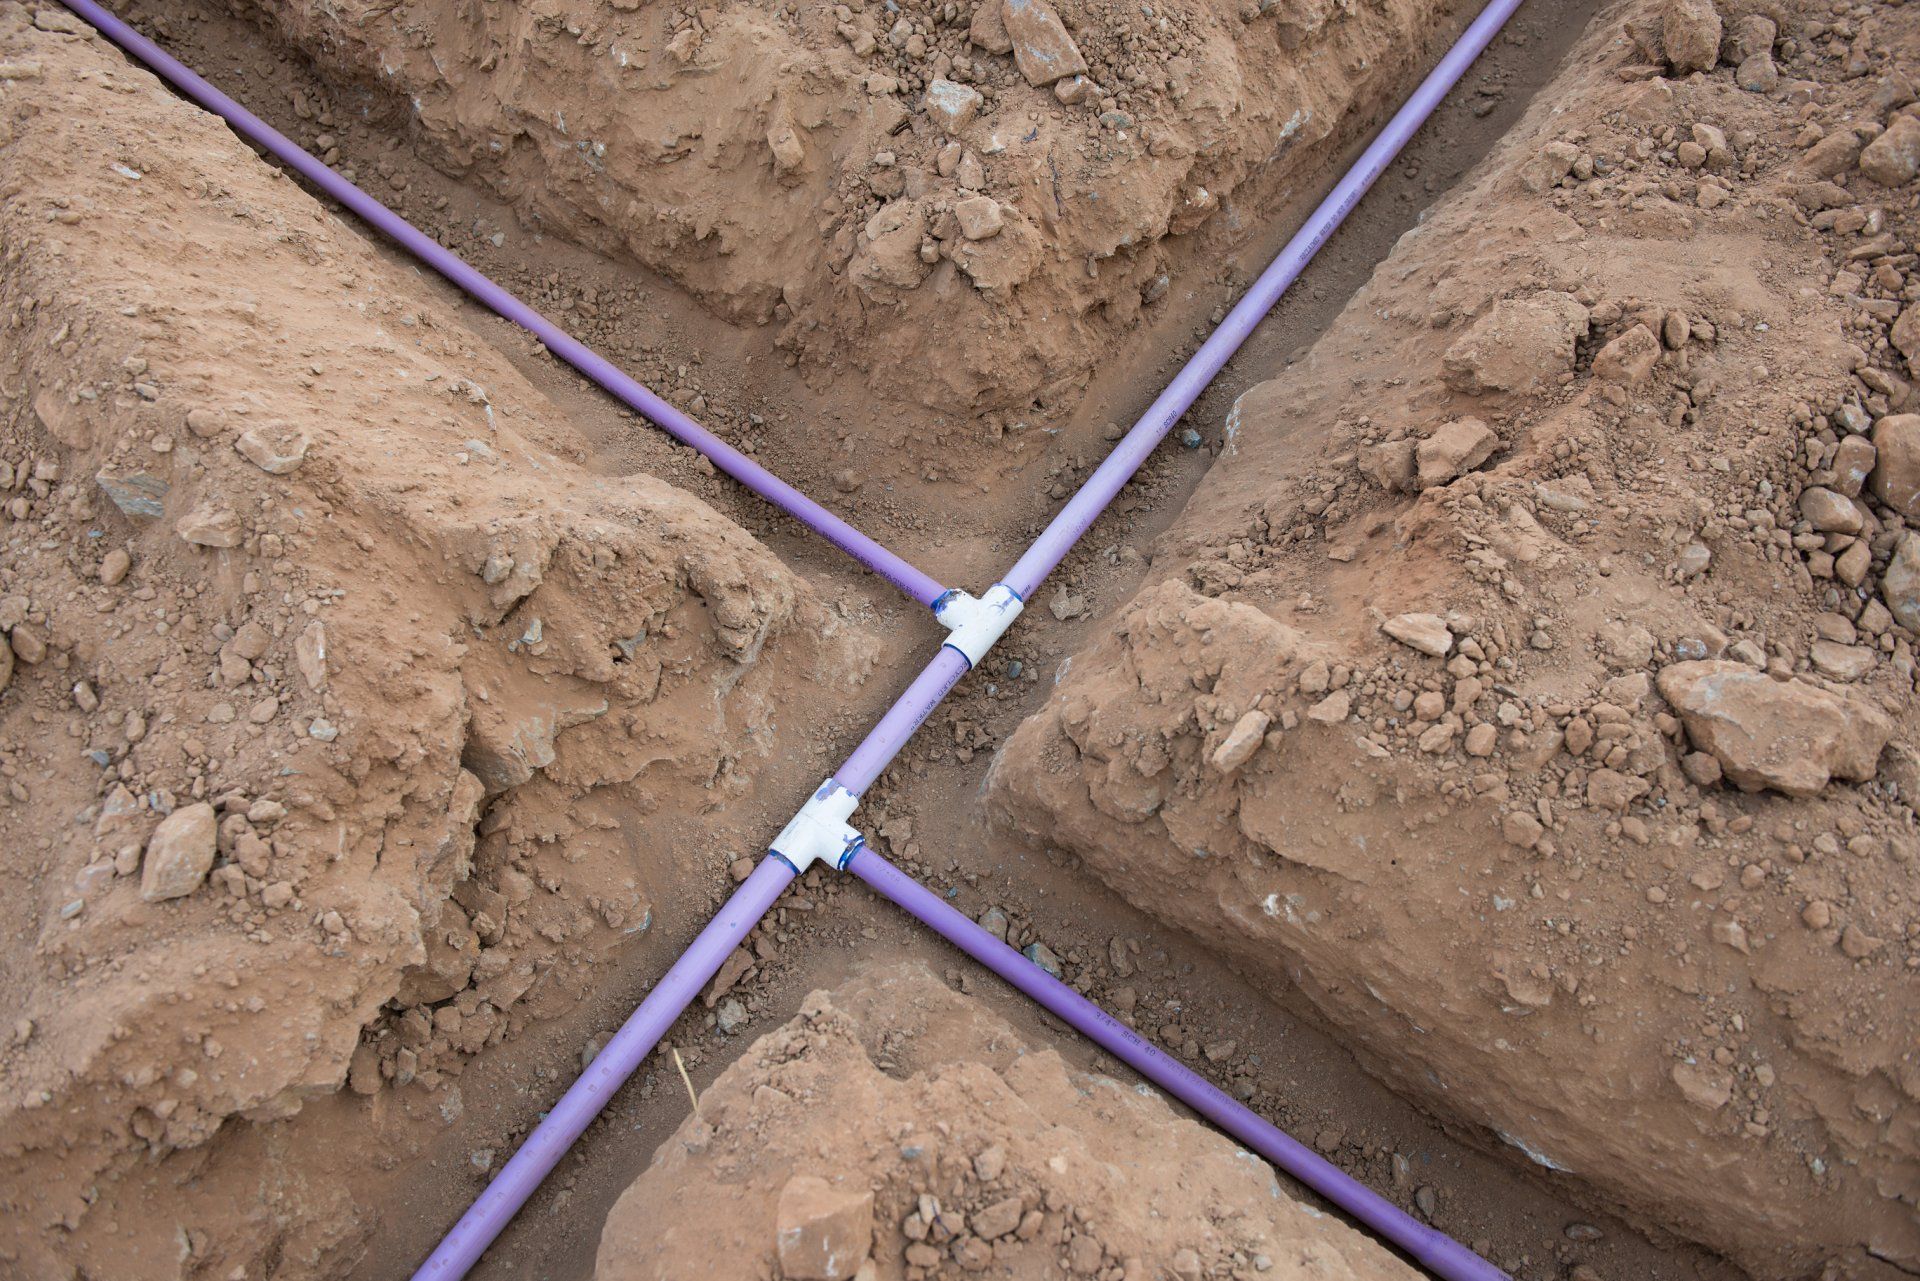 pvc piping for an underground sprinkler system installation in phoenix